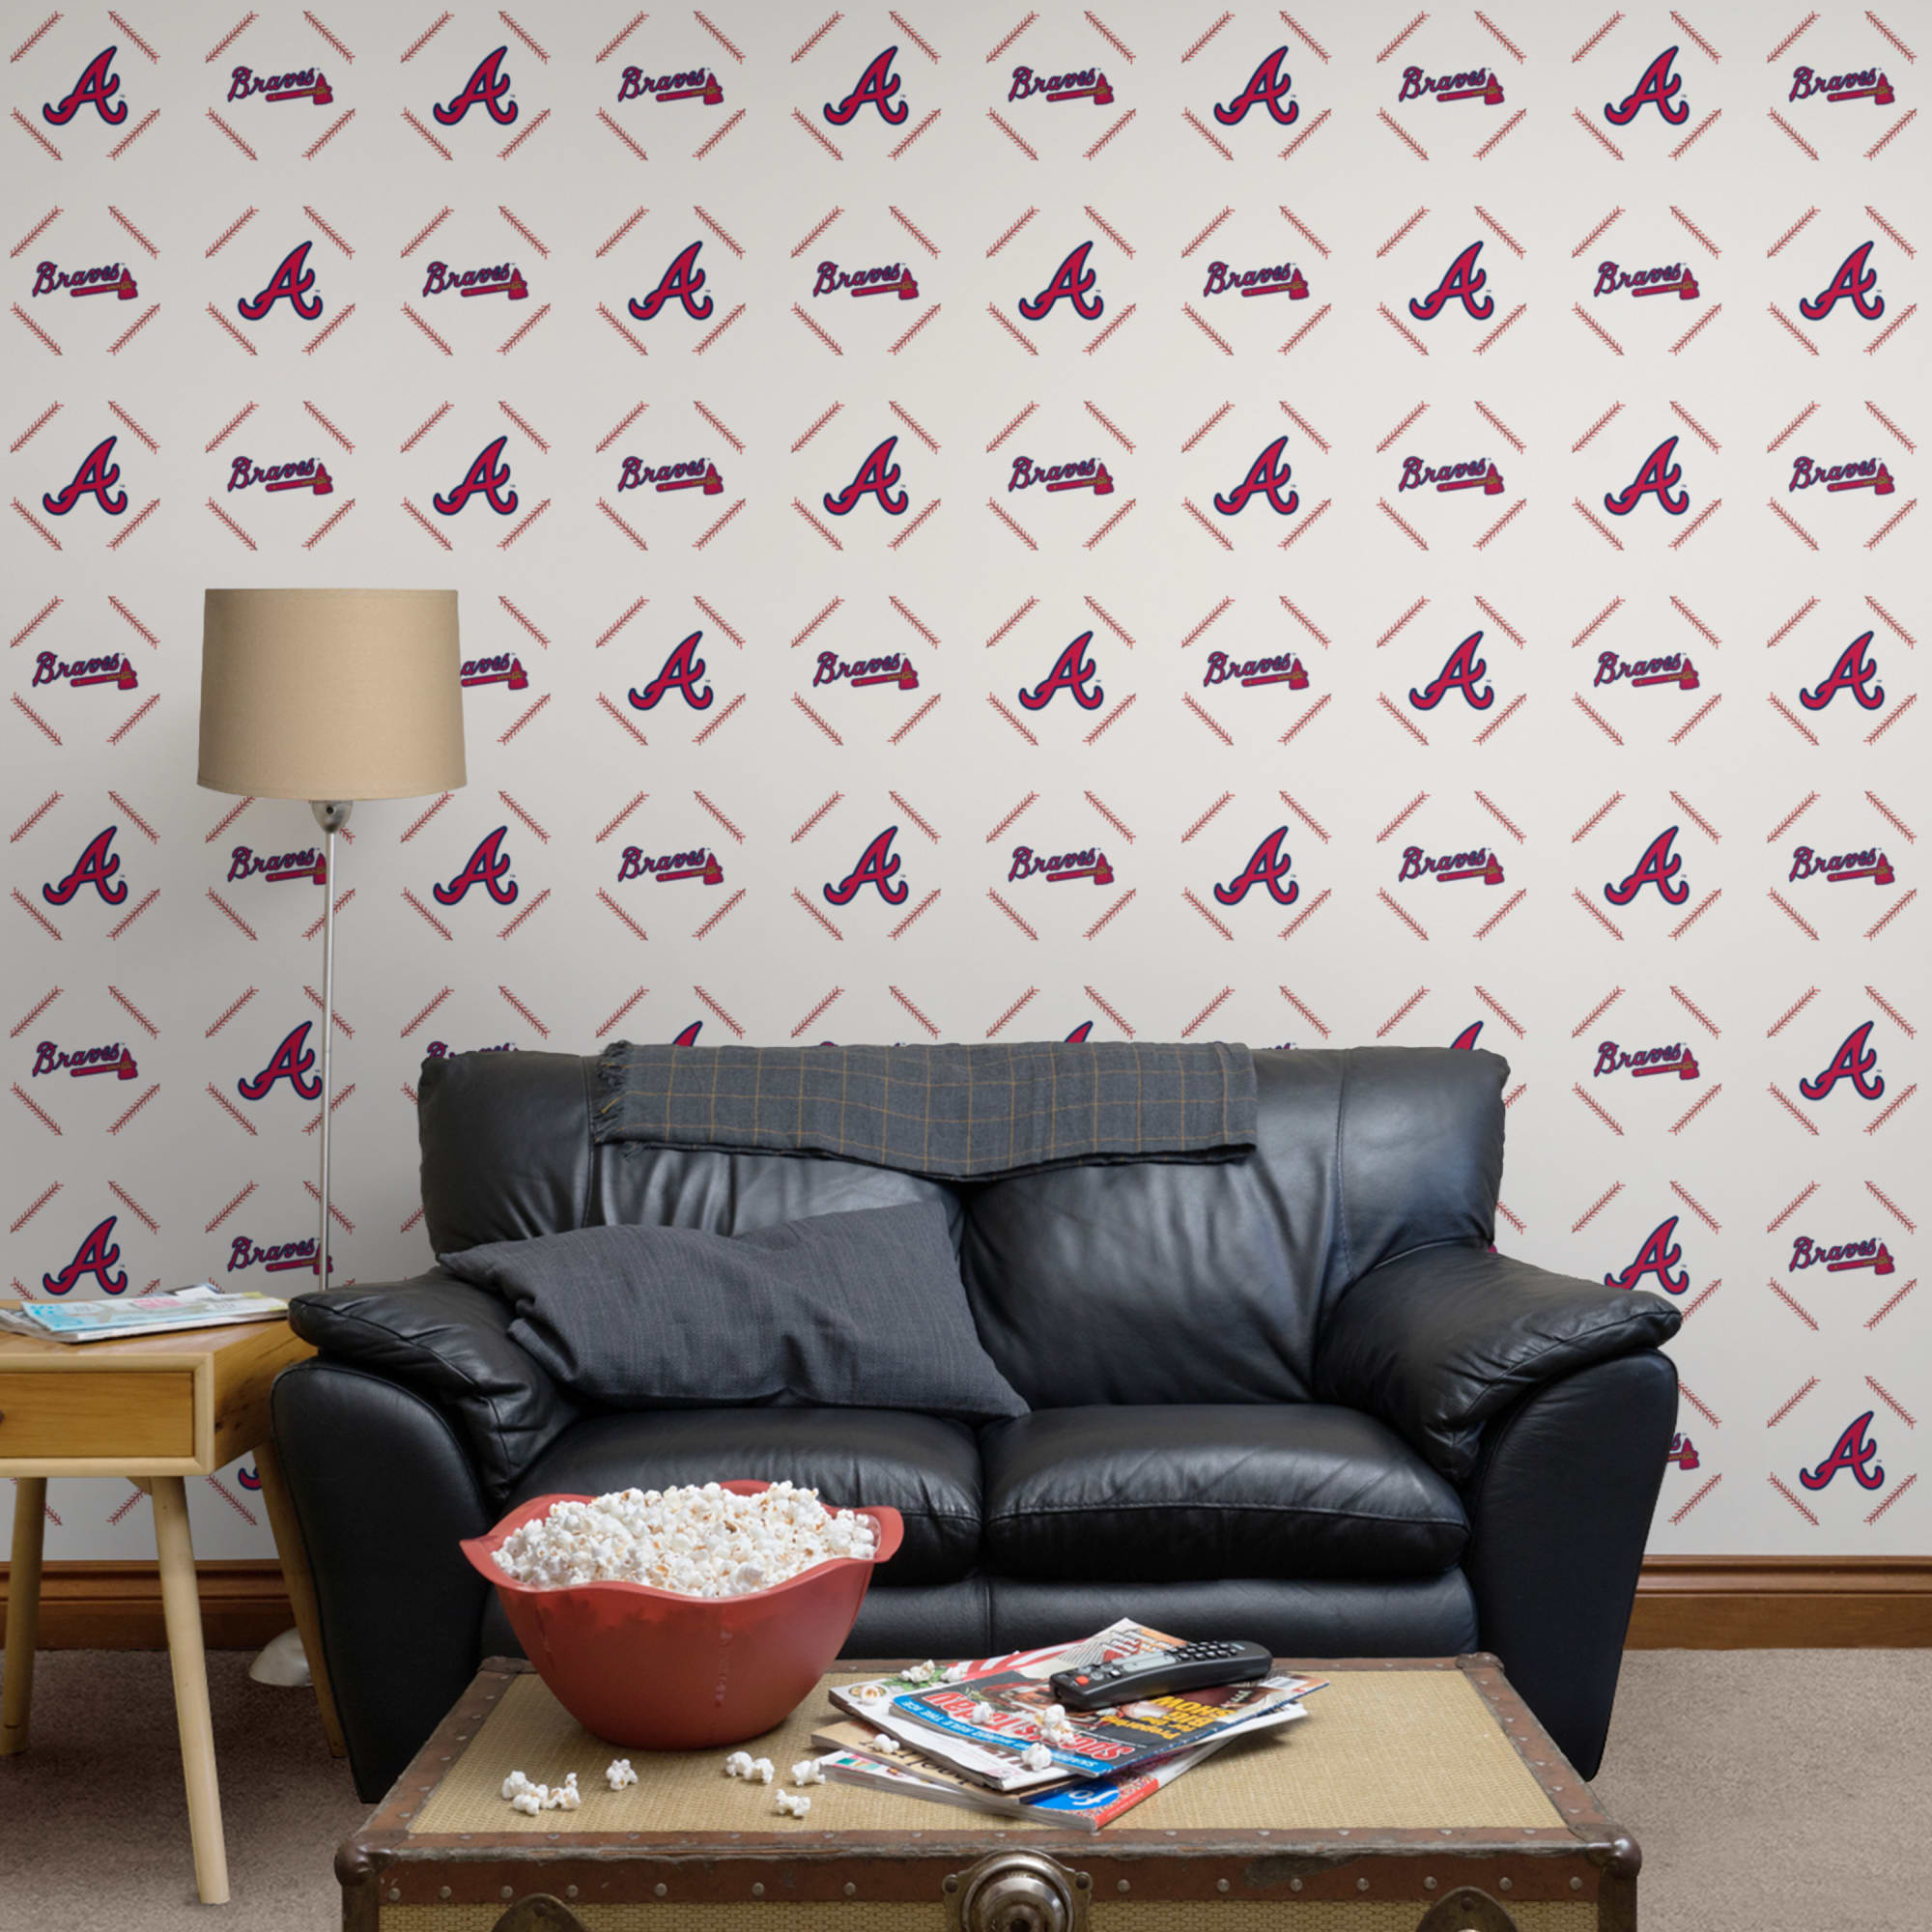 Atlanta Braves: Stitch Pattern - Officially Licensed Removable Wallpaper 12" x 12" Sample by Fathead